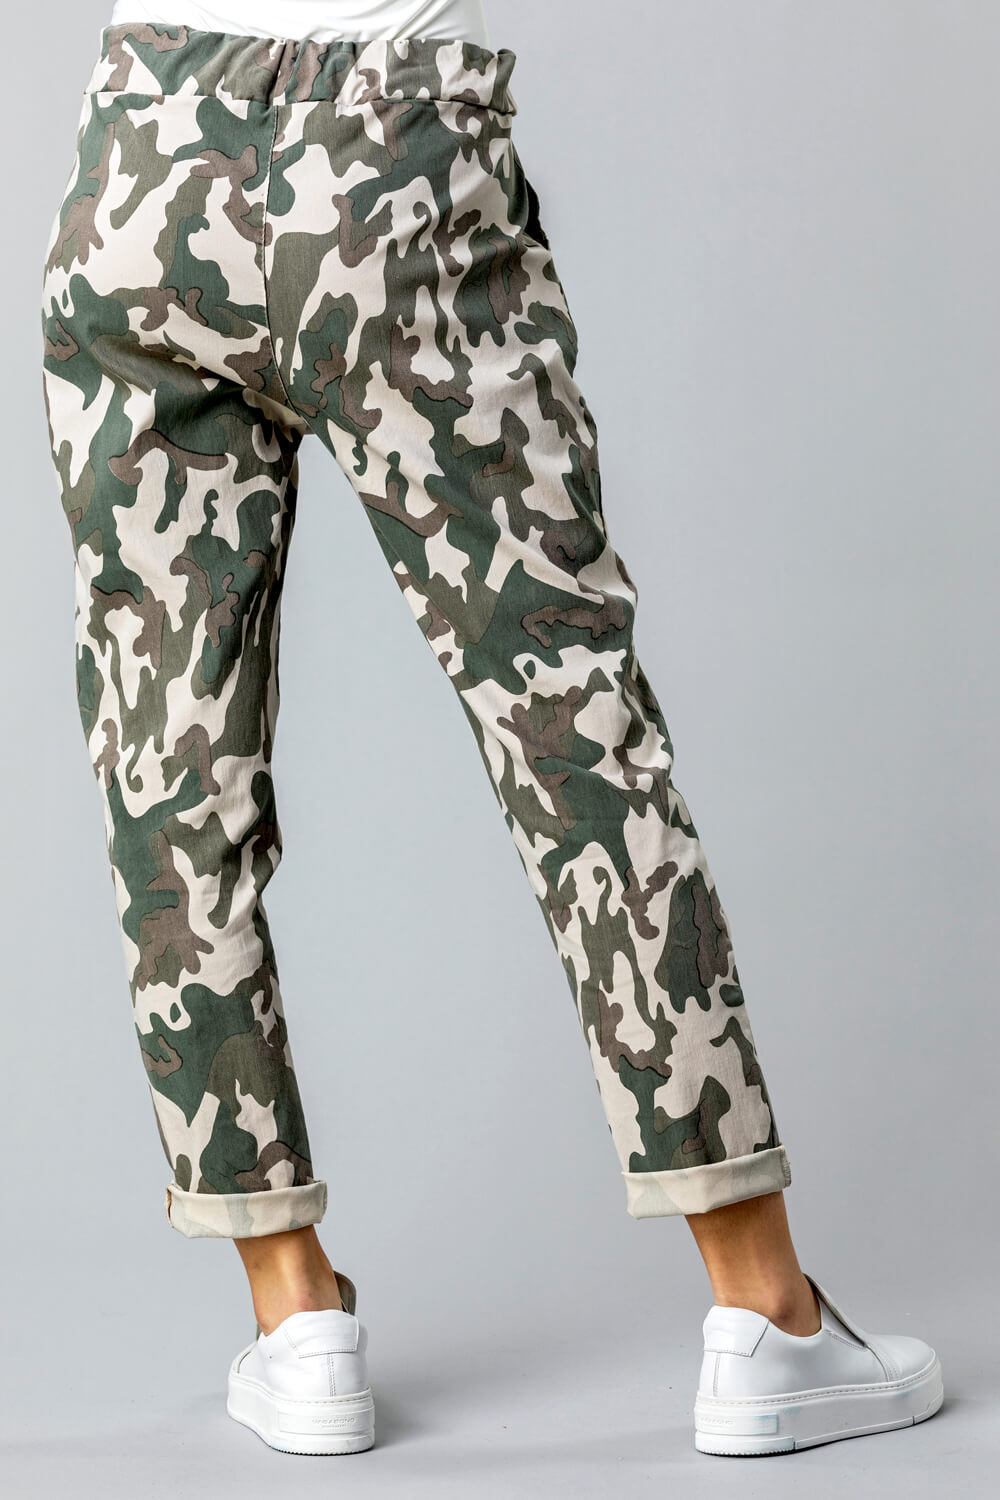 Pale Green Camo Print Crinkle Lounge Pant, Image 2 of 4